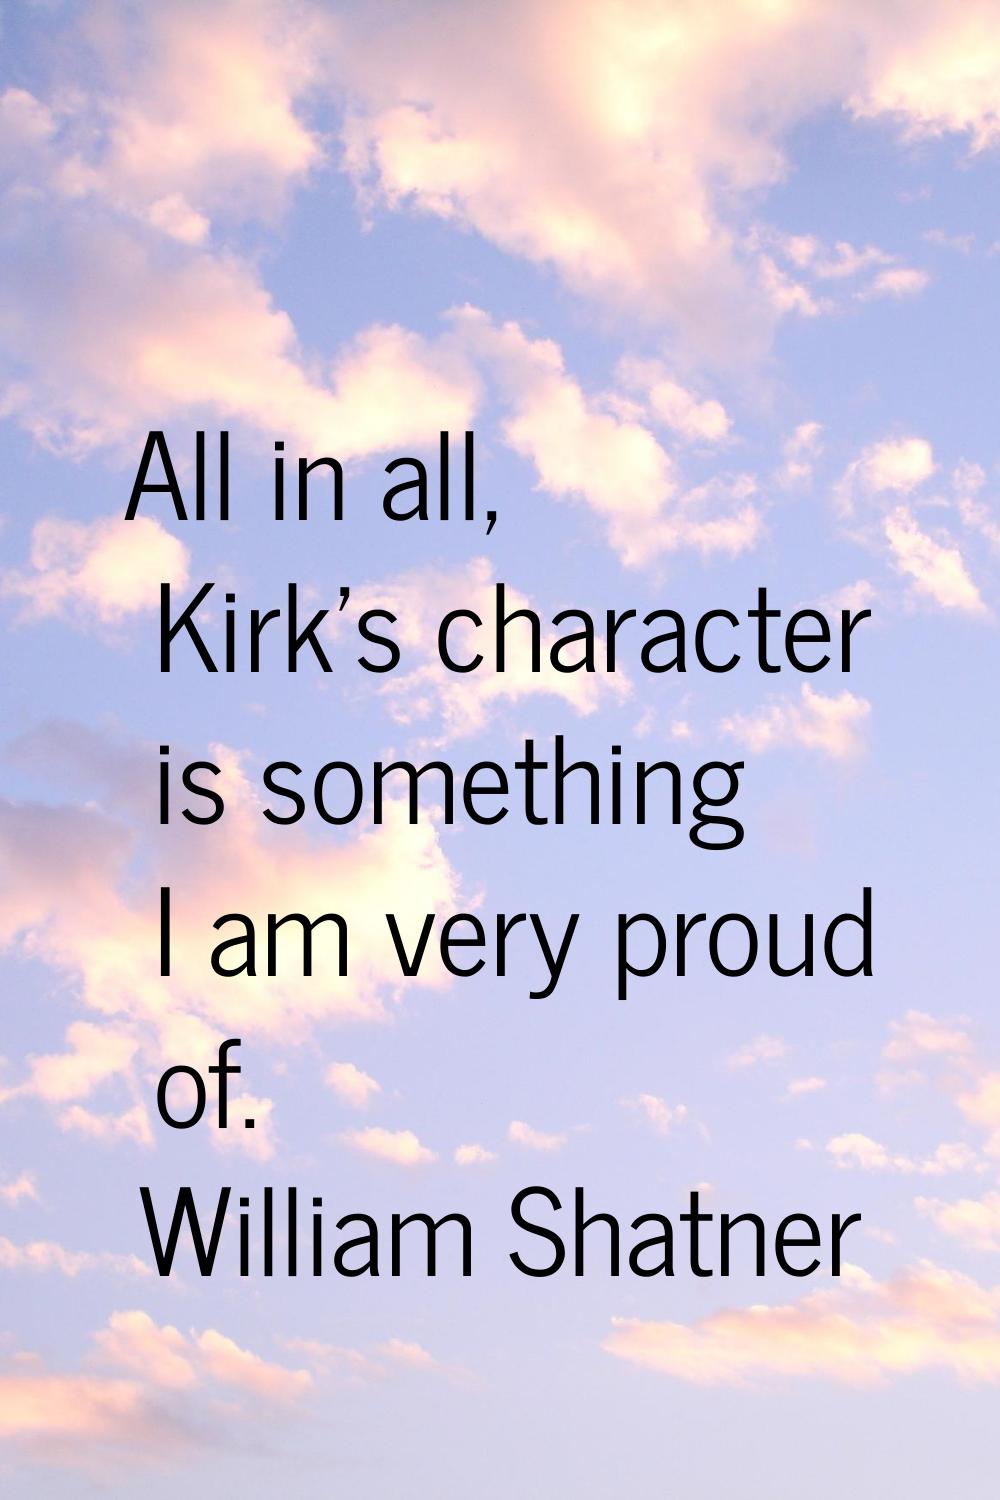 All in all, Kirk's character is something I am very proud of.